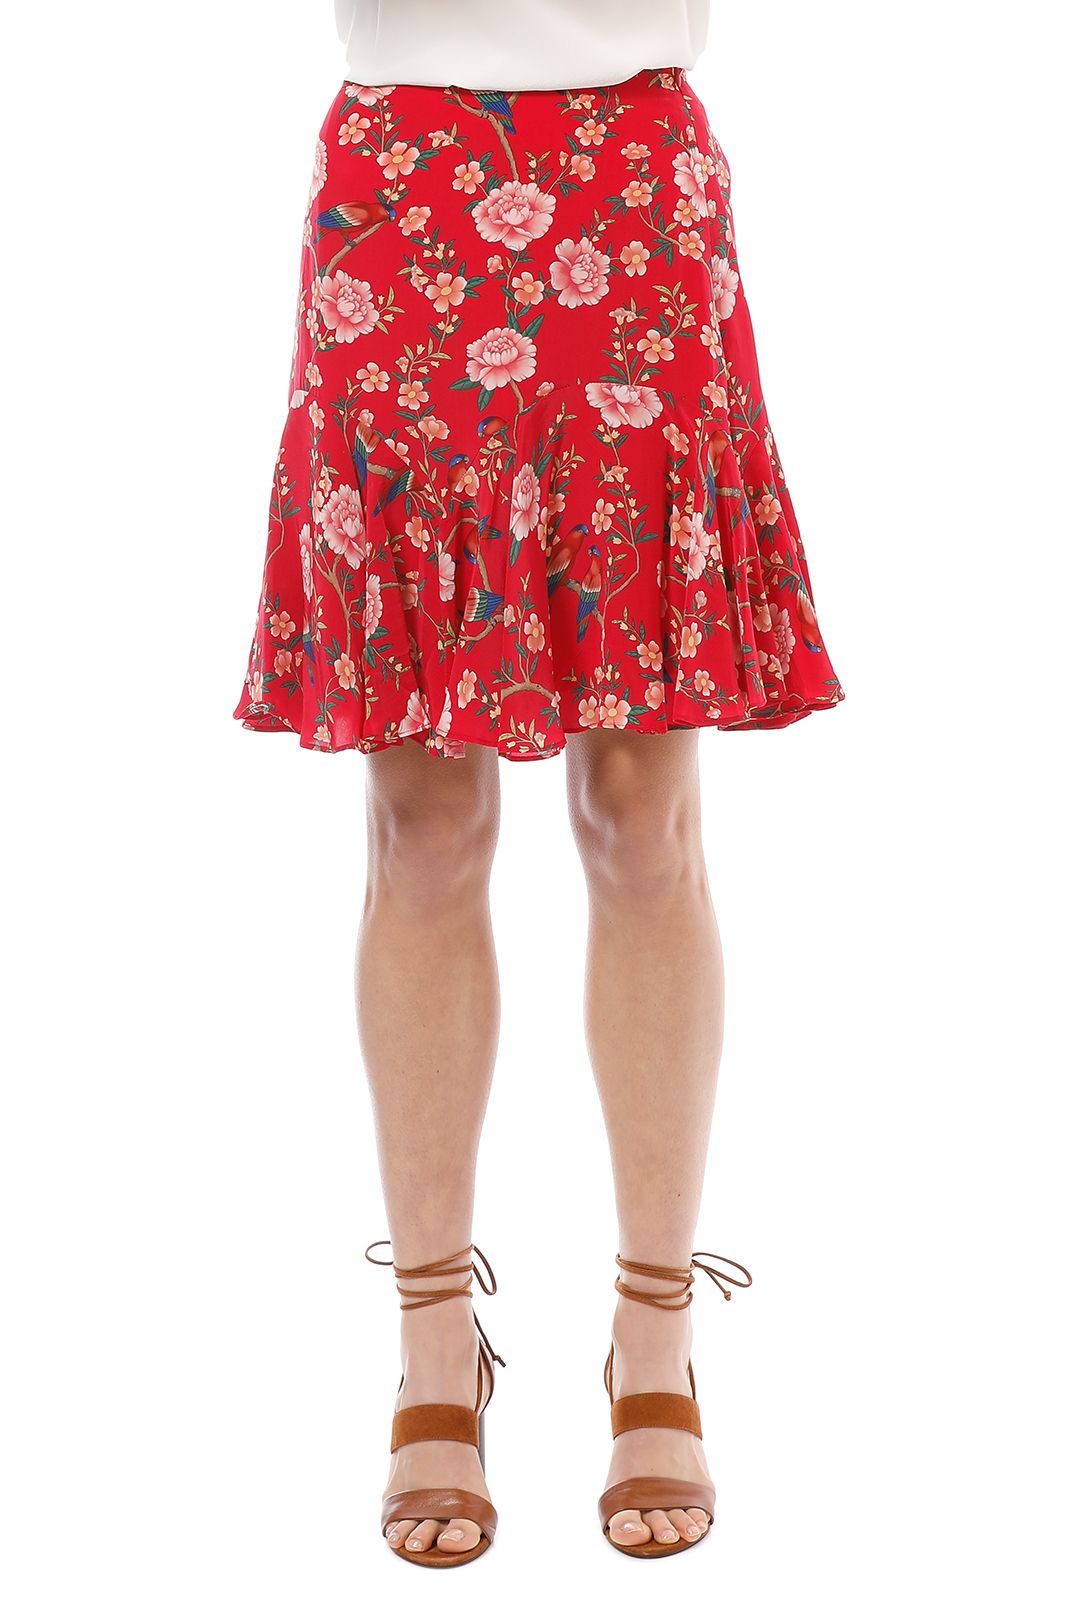 Own Wings Skirt in Red by Alannah Hill for Hire